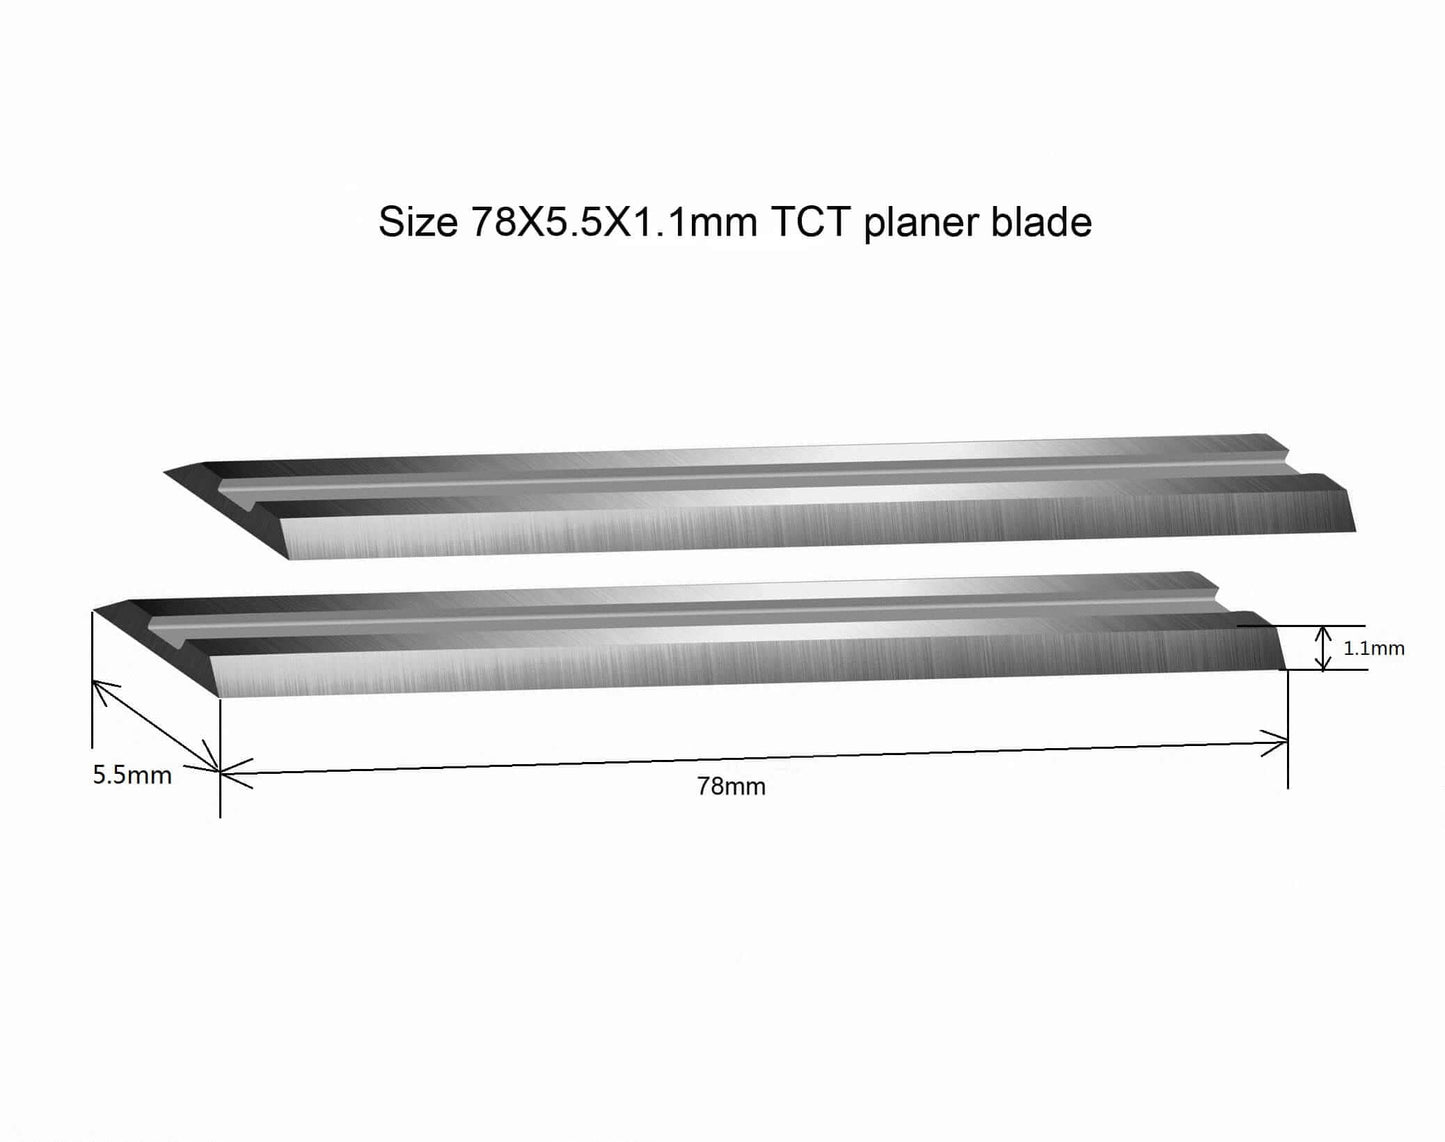 size of carbide planer blade 78x5.5x1.1mm